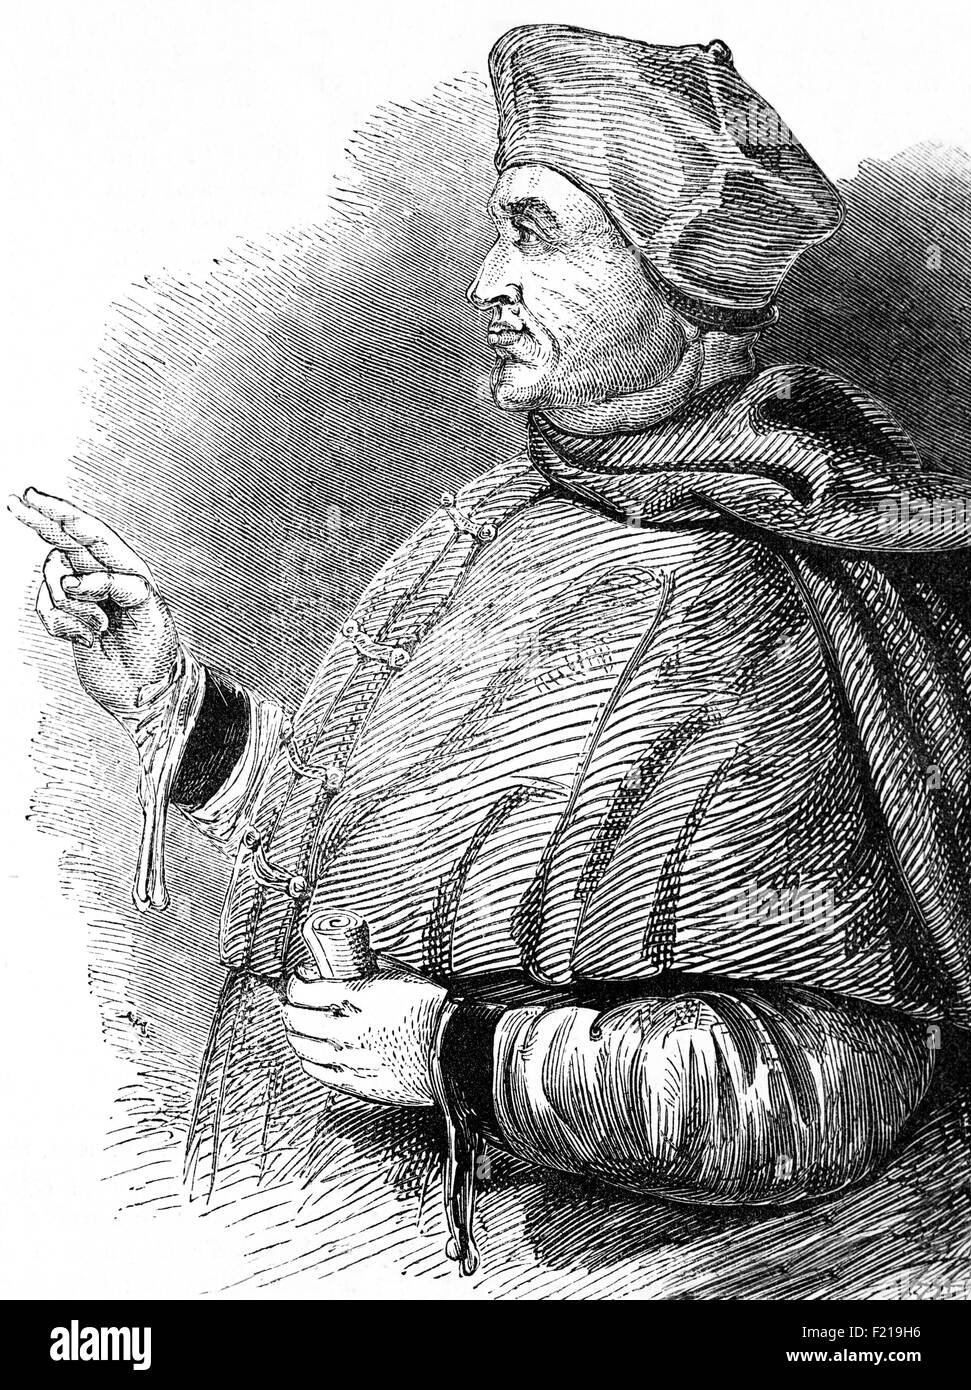 Thomas Wolsey (1473-1530) was an English political figure and cardinal of the Roman Catholic Church.  When Henry VIII became king of England in 1509, Wolsey became the King's almoner and Lord Chancellor, the King's chief adviser. England Stock Photo